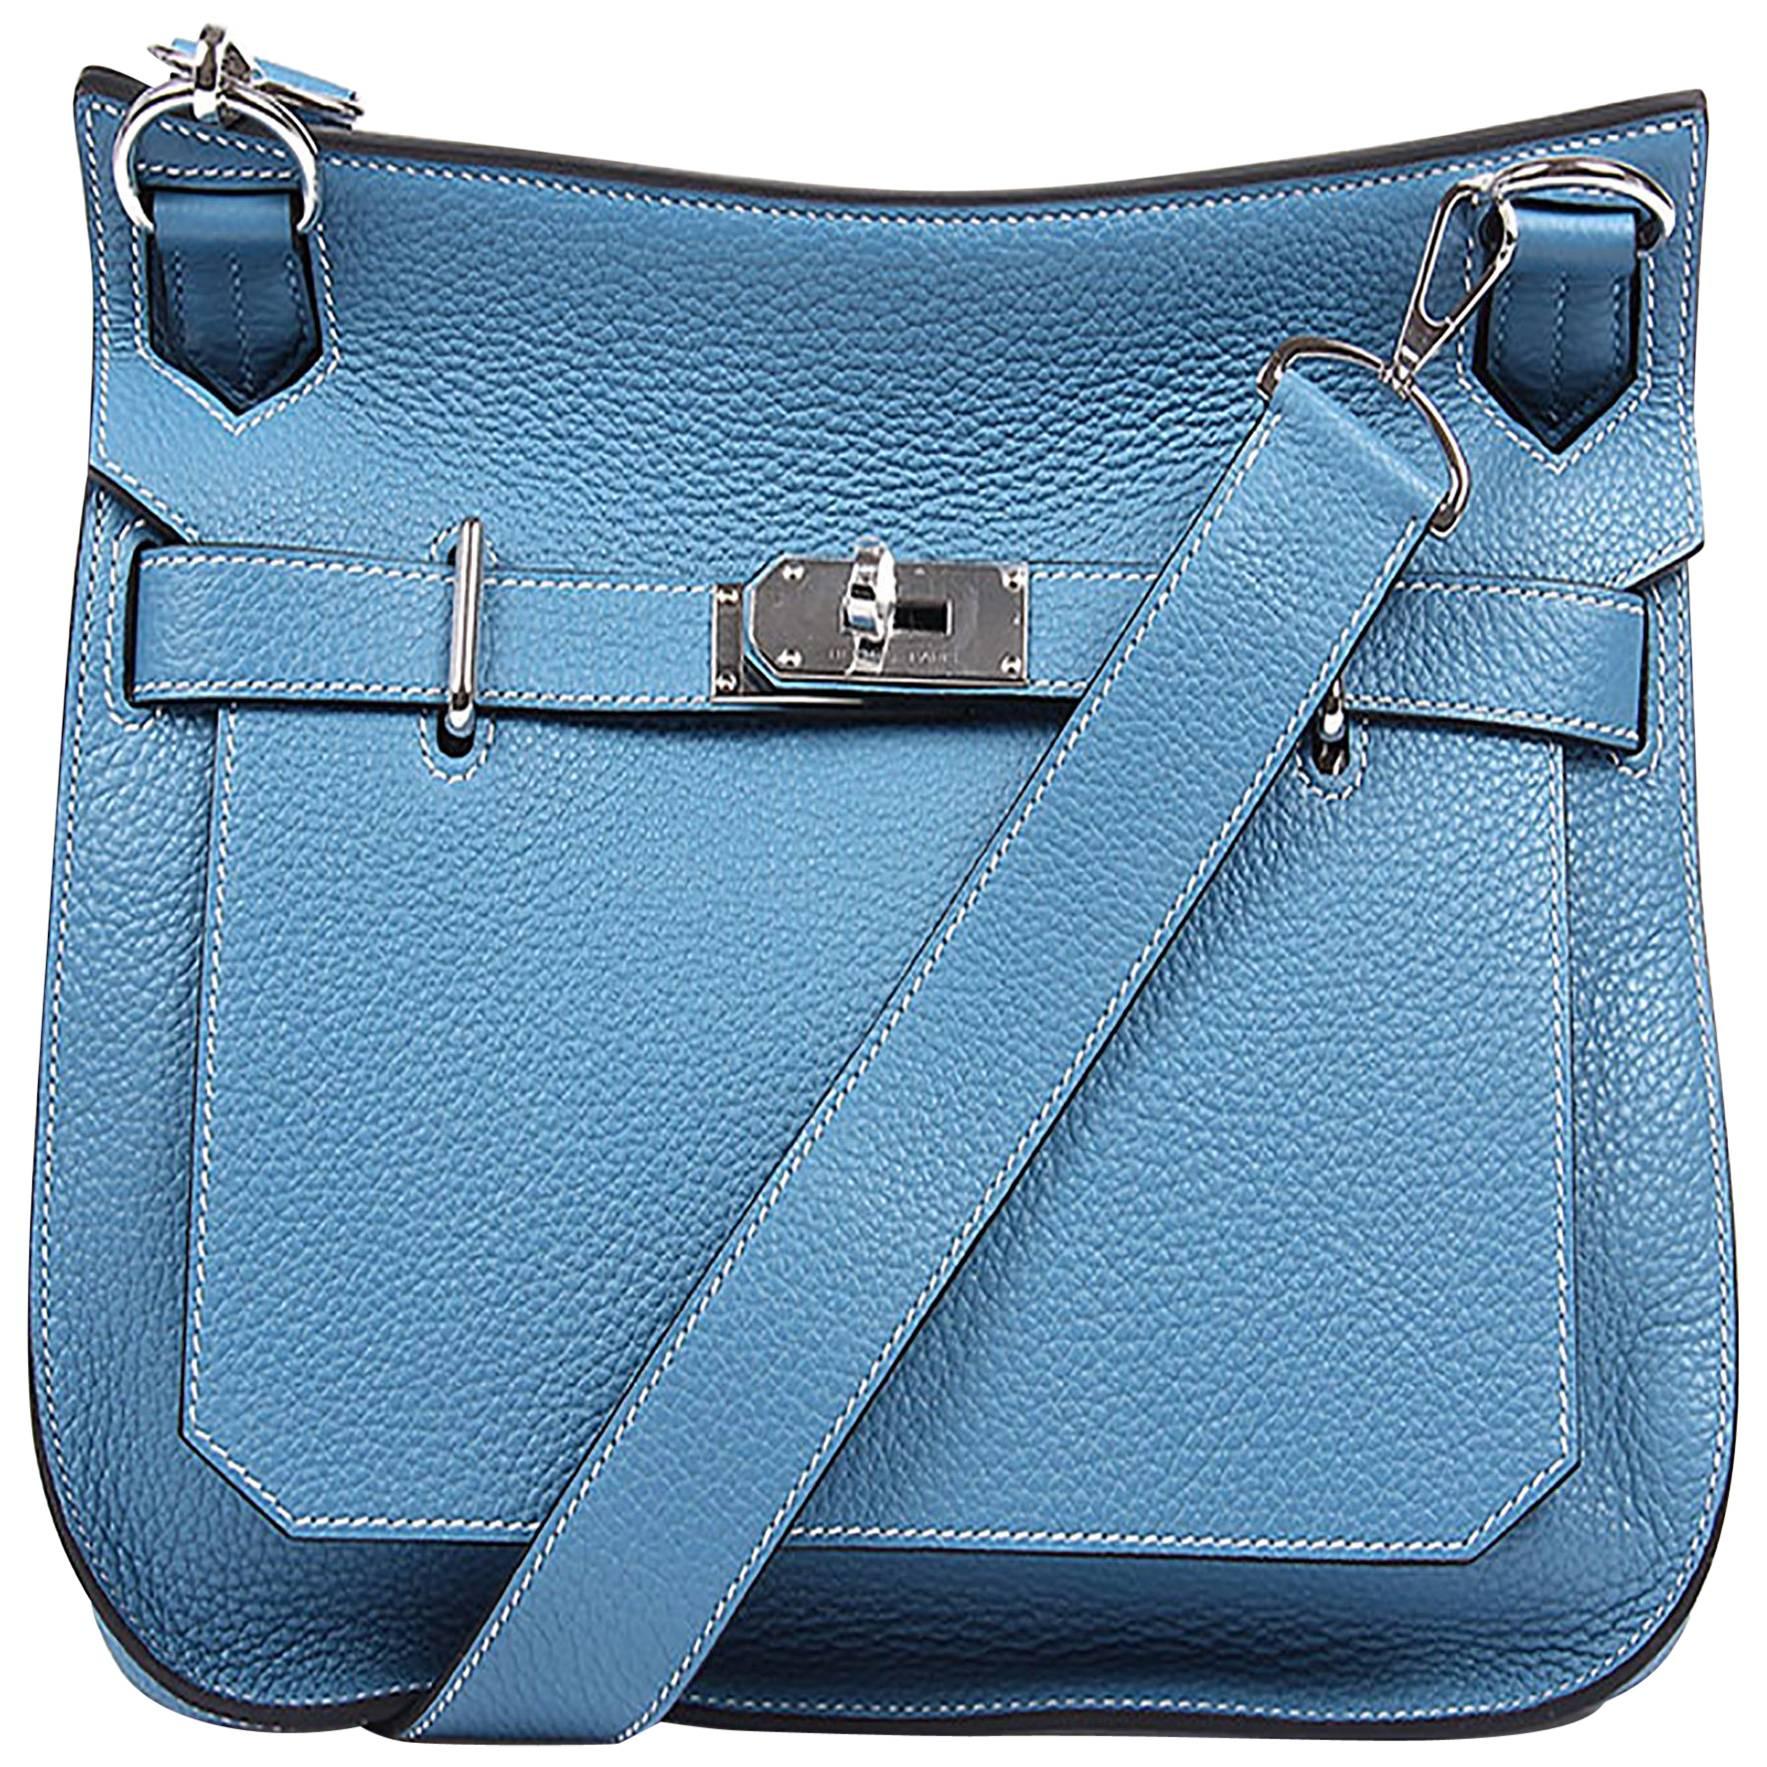 HERMES Jypsiere 28 T. Clemence Leather Blue Jean Color PHW